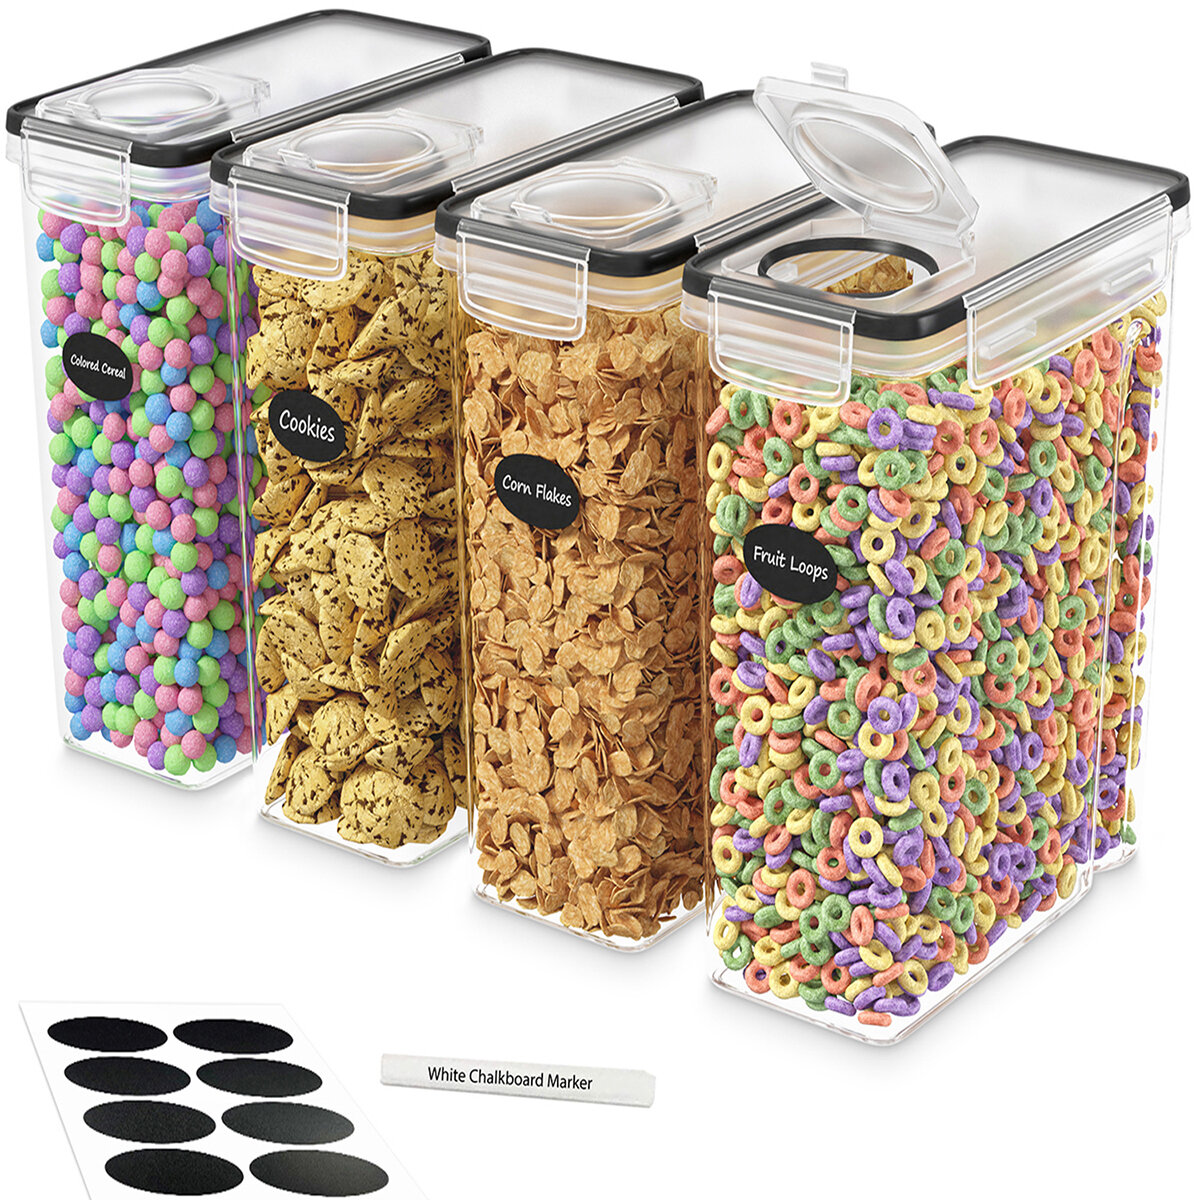 DWËLLZA KITCHEN Cereal Airtight 4 Container Food Storage Set & Reviews